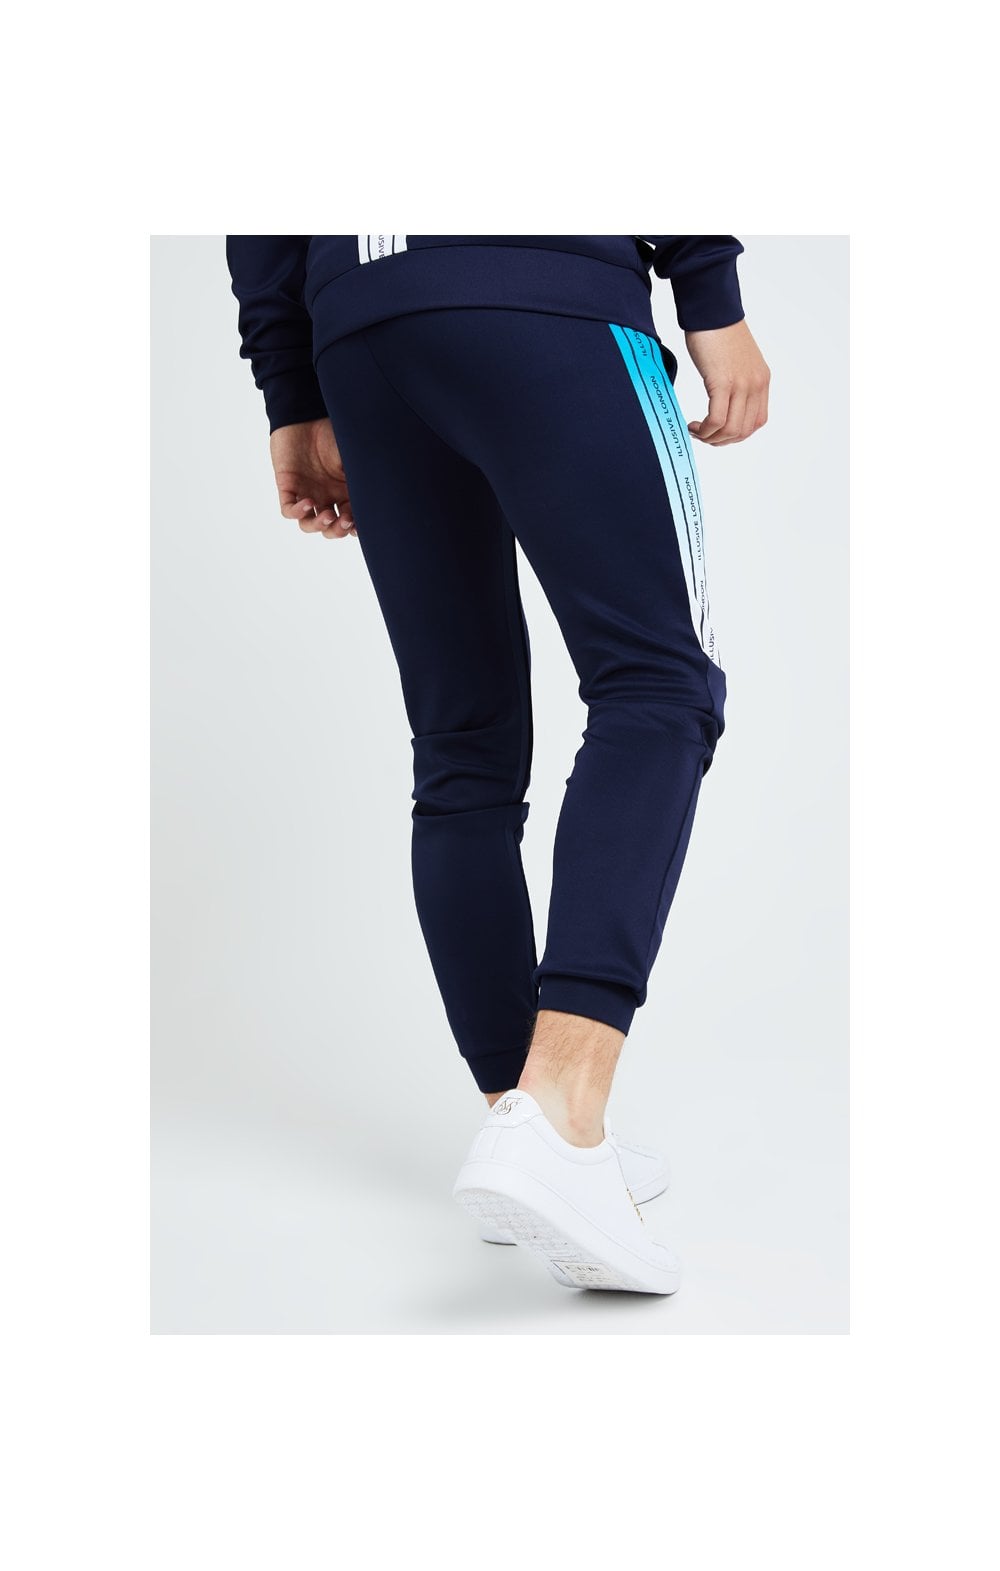 Illusive London Flux Taped Joggers - Navy &amp; Blue (2)